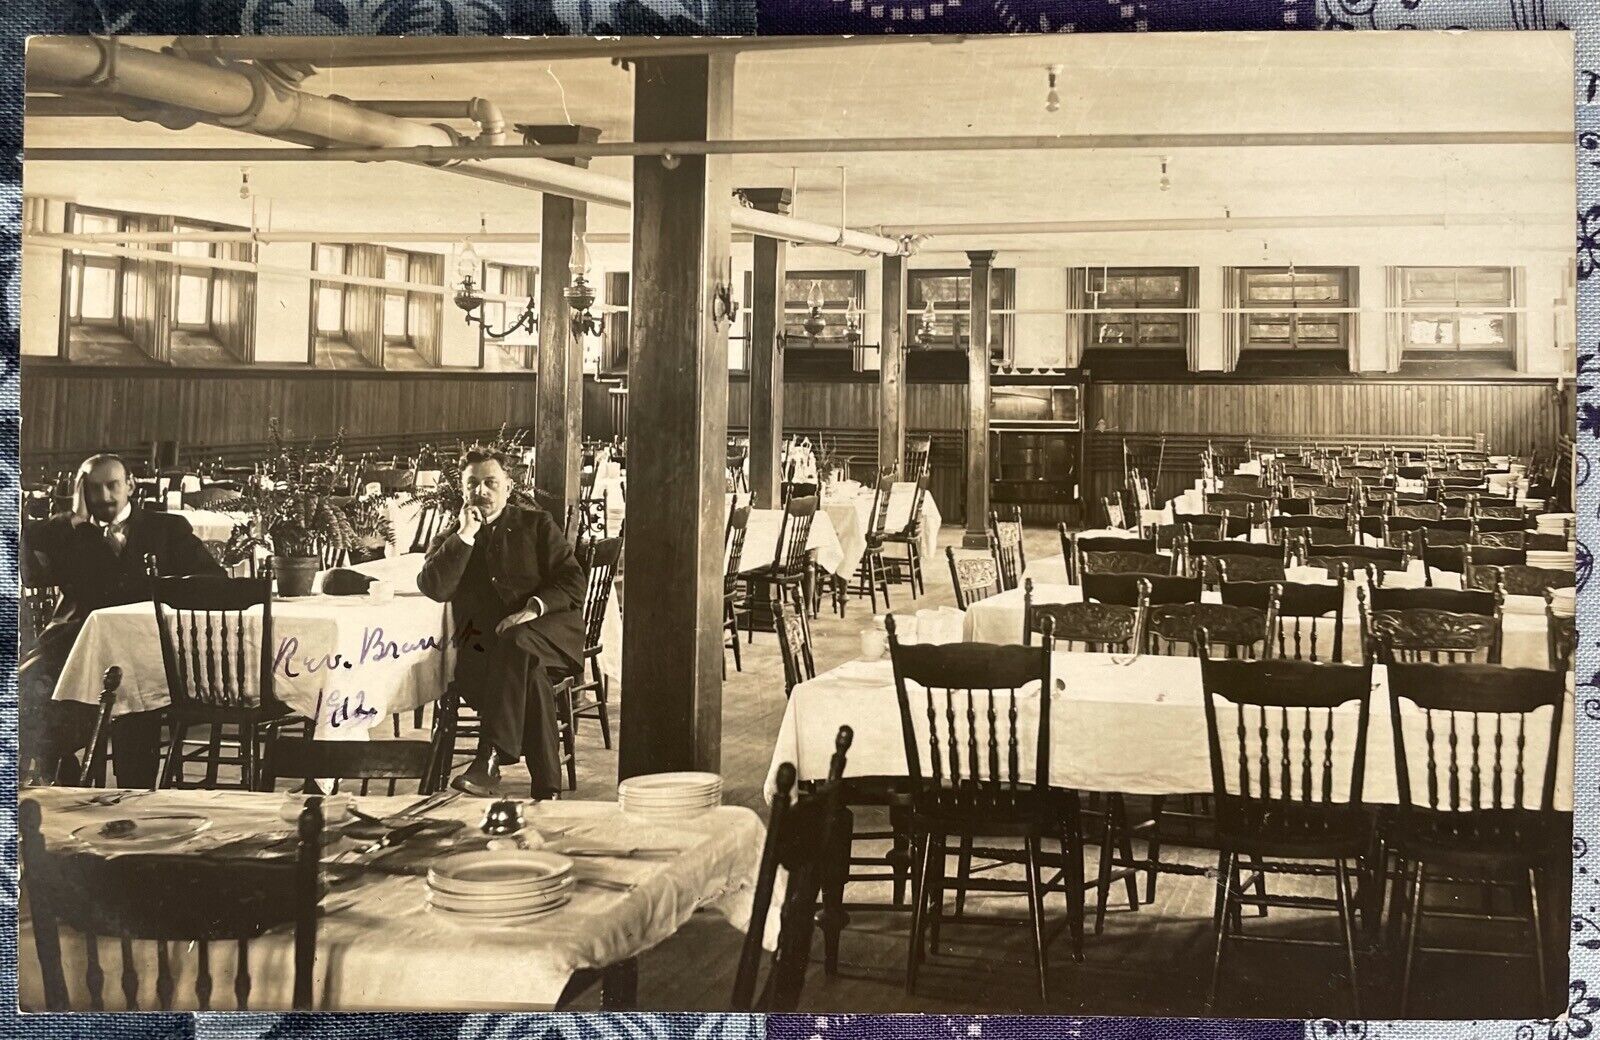 Pointe-aux-Trembles Instituts. Dr. Brandt. Dining Hall. #2 Real Photo Postcard. 